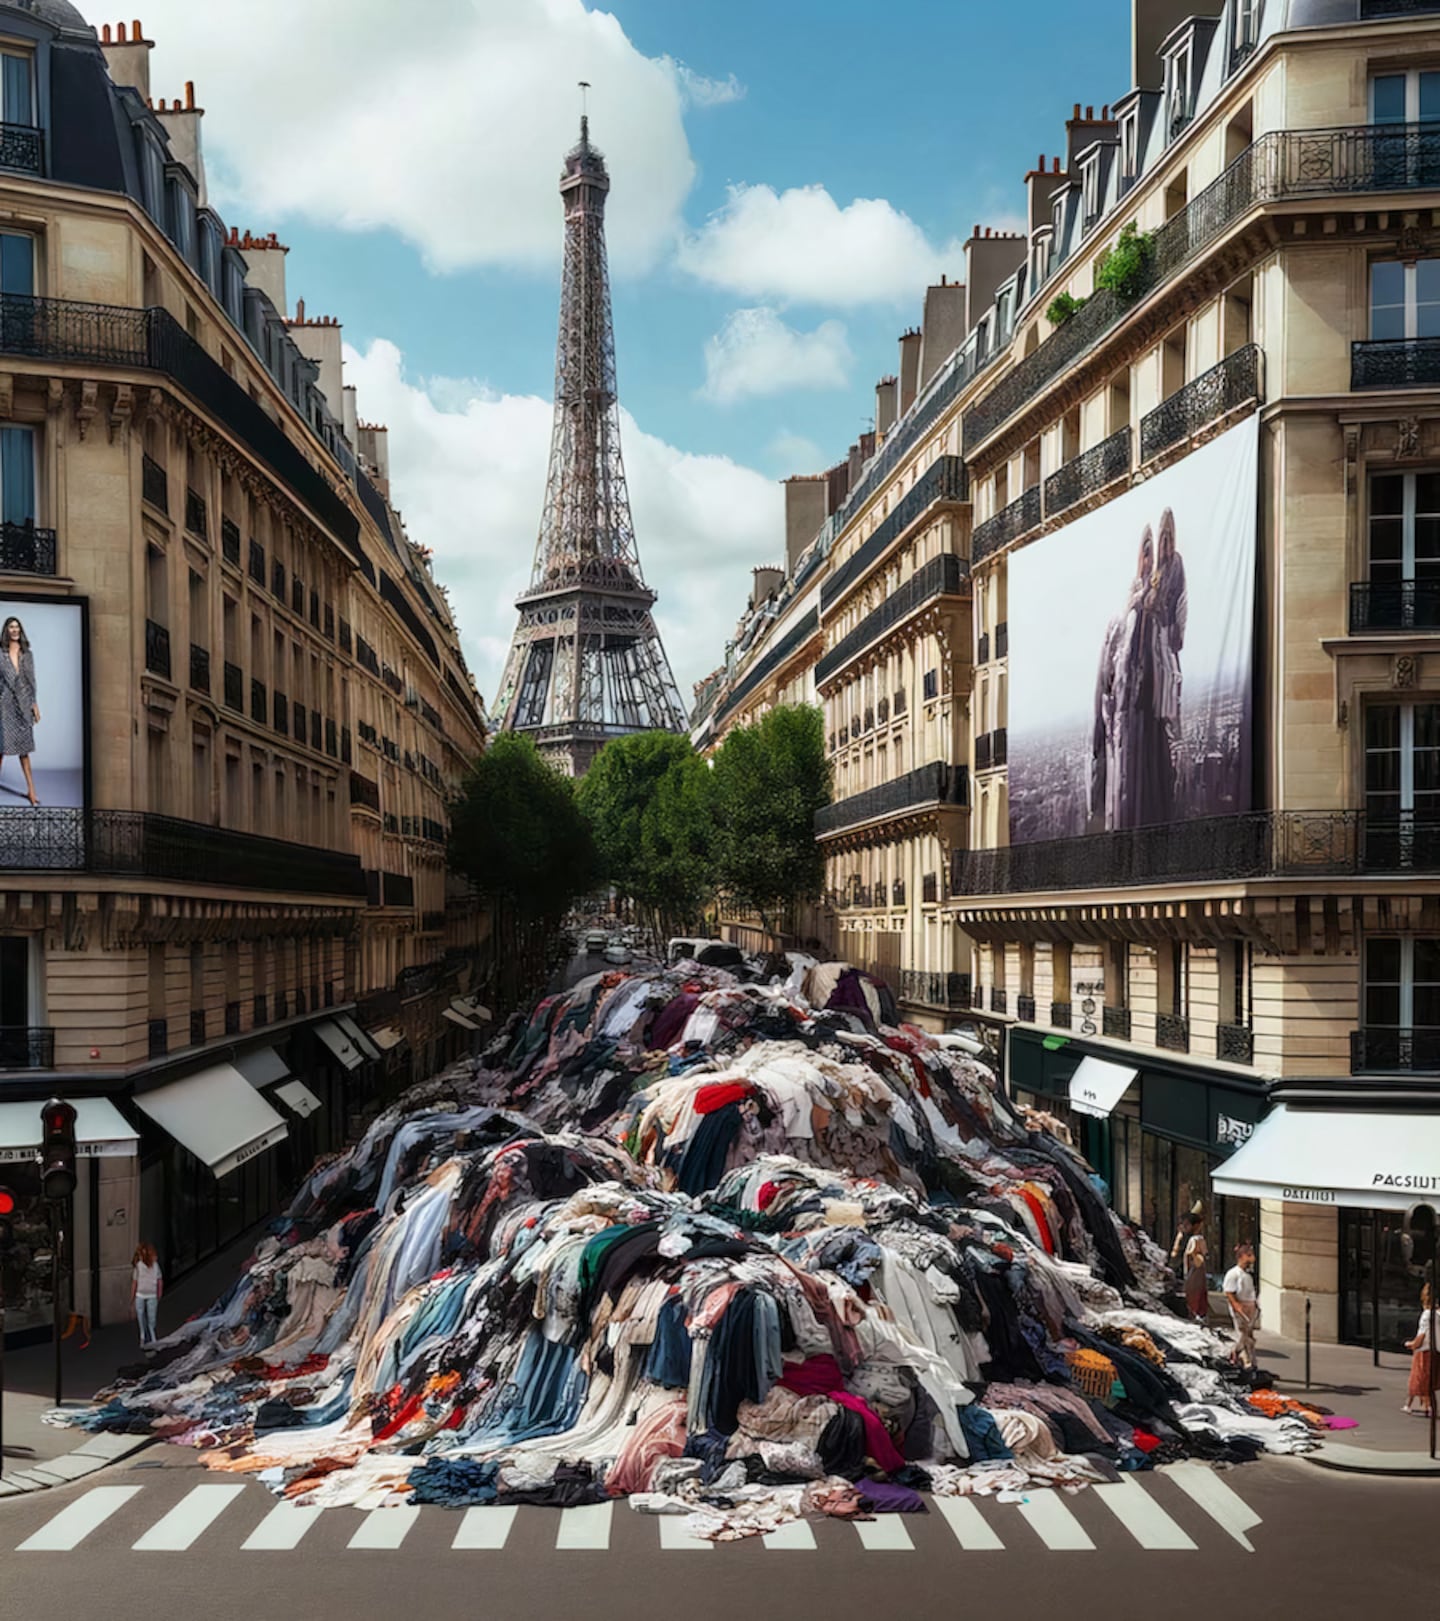 A pile of old clothes is stacked high on an avenue leading up to the Eiffel Tower in Paris.